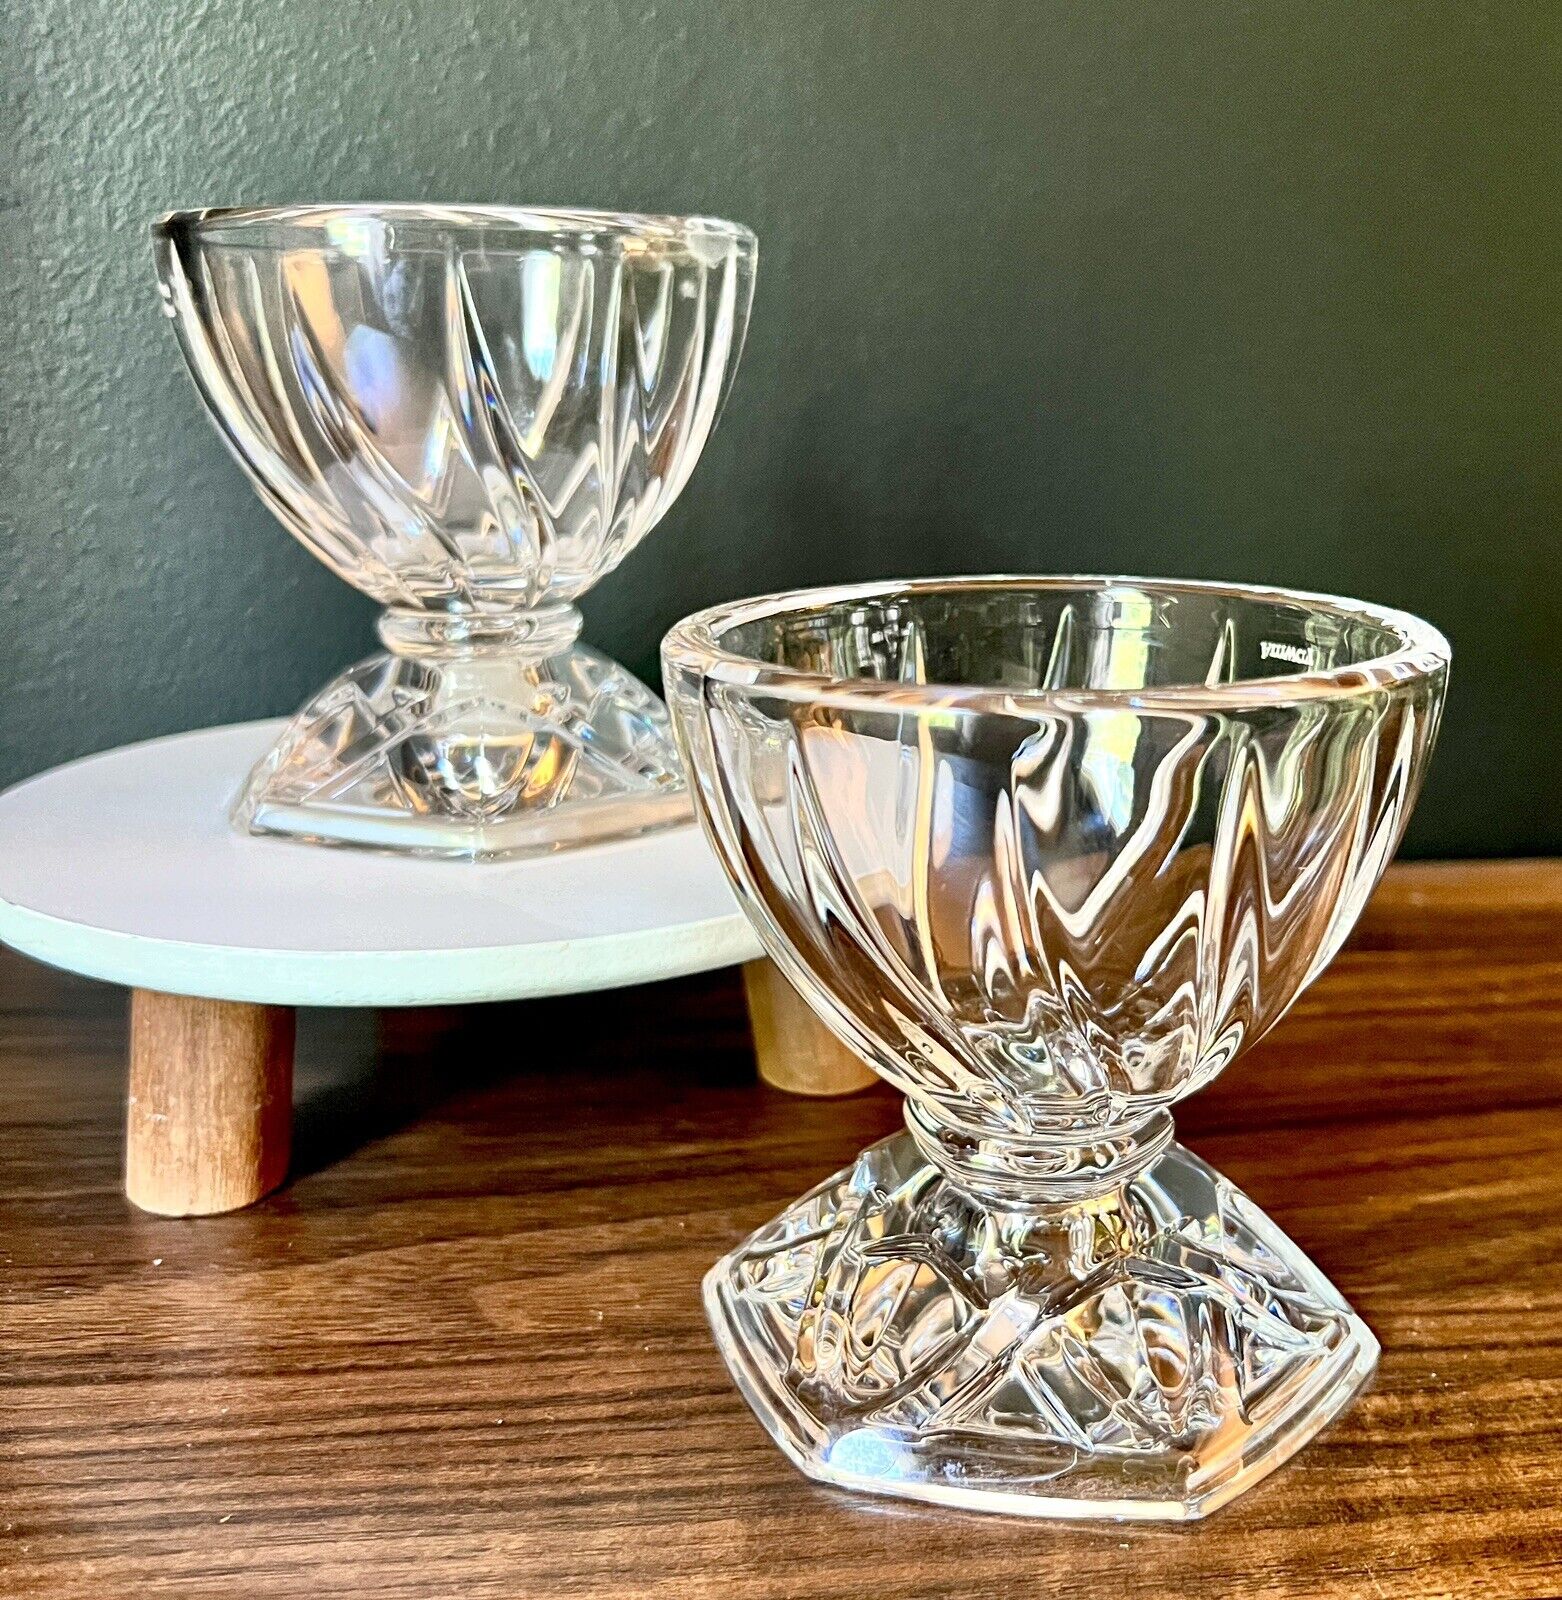 Marquis By Waterford Crystal Dessert Ice Cream Bowls Made In Germany Amway (2)